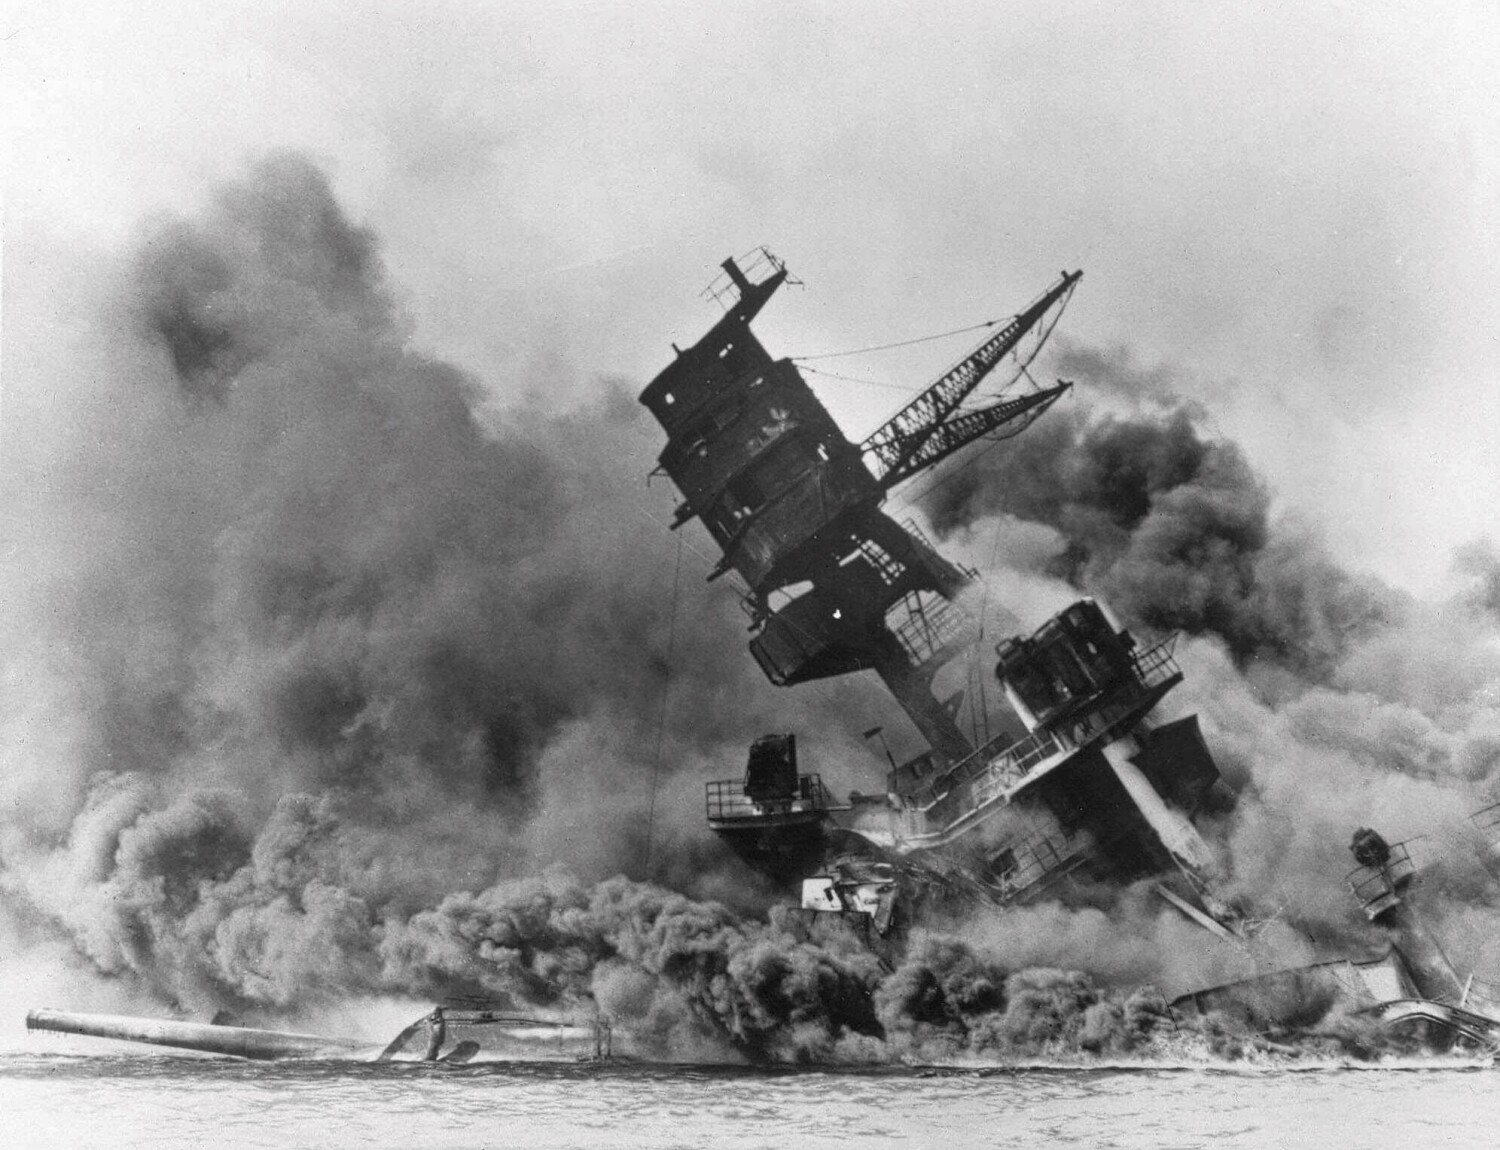 Column: For many alive during Pearl Harbor, the war years were the most momentous of our lives